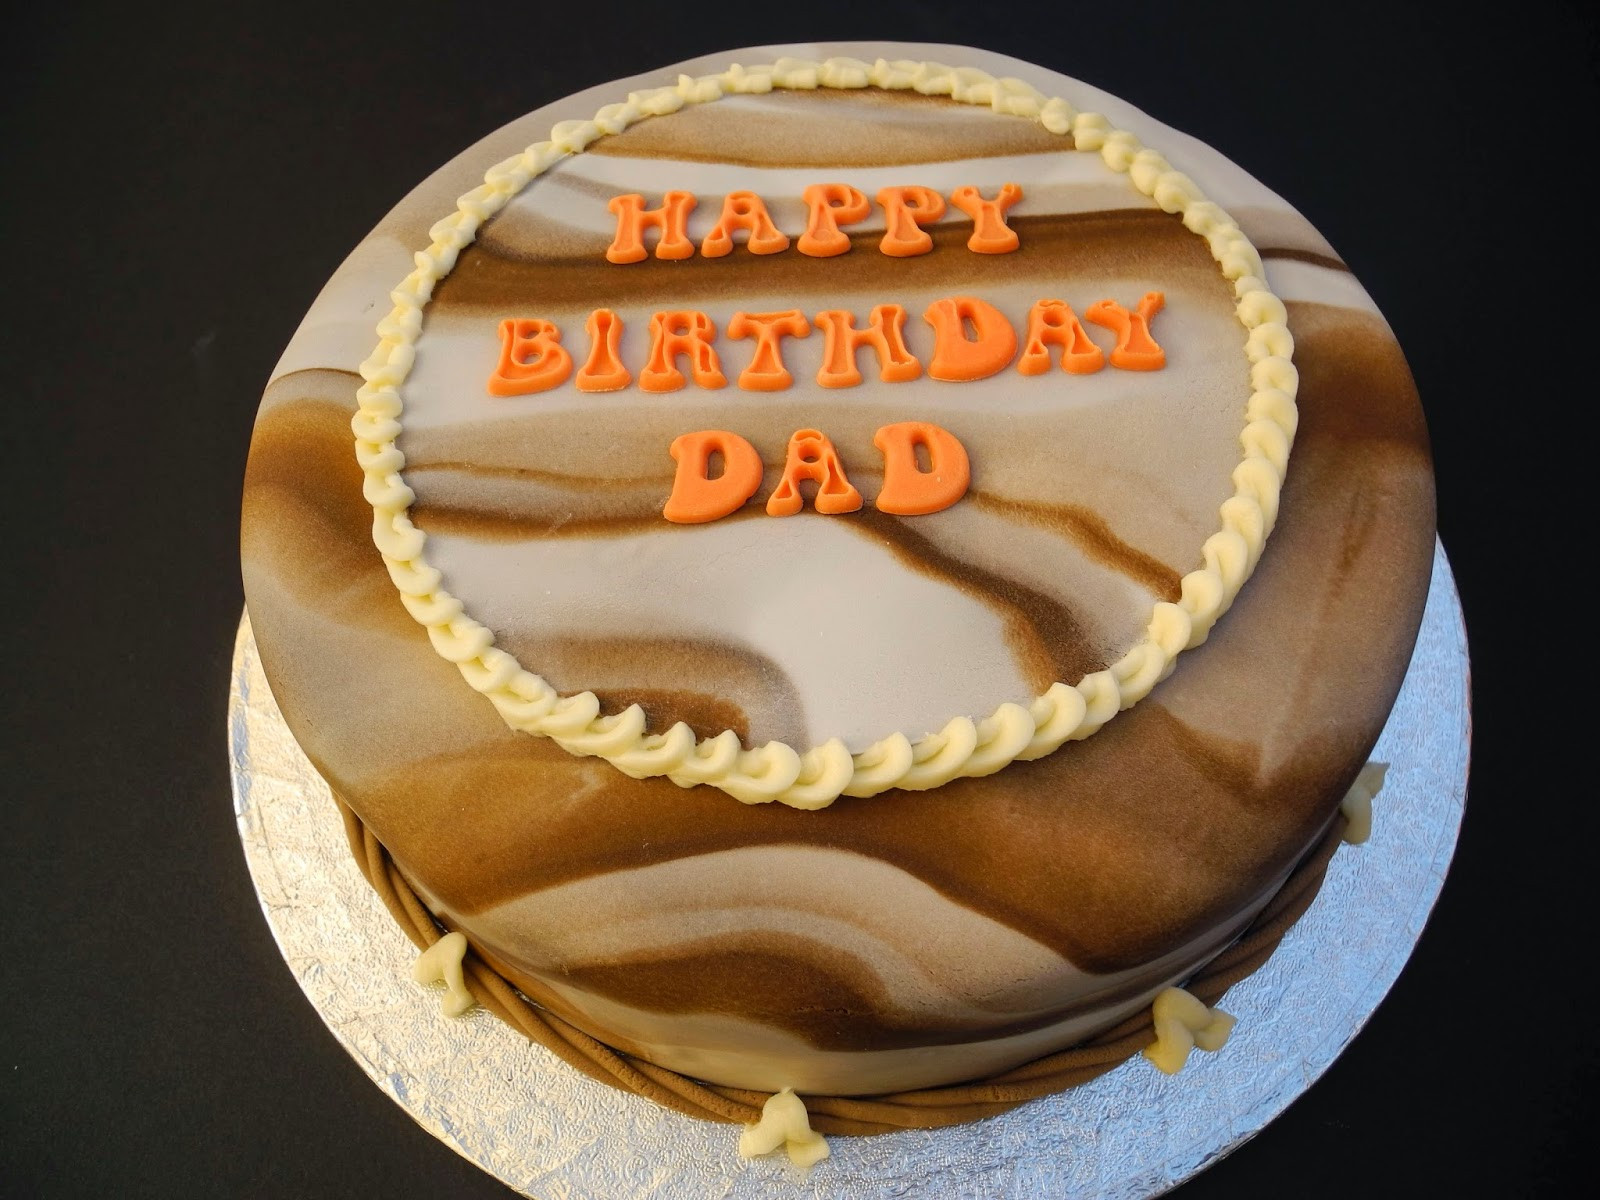 Happy Birthday Dad Cake
 Birthday Wishes For Father Page 8